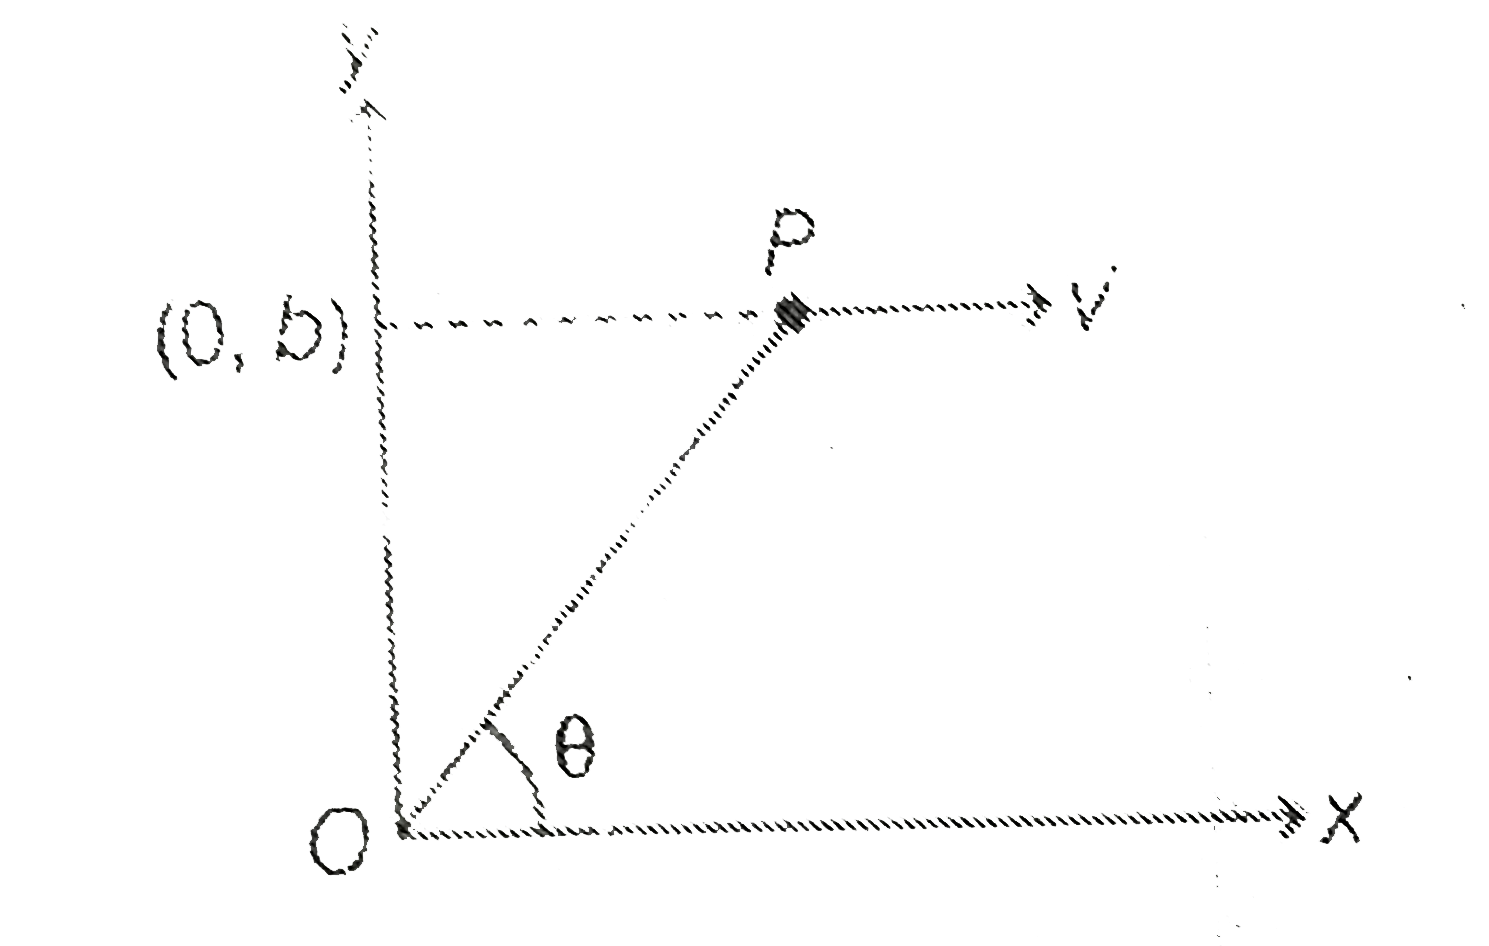 A particle is moving parallel to x-axis as shown in the figure. The angular velocity of the particle about the origin is